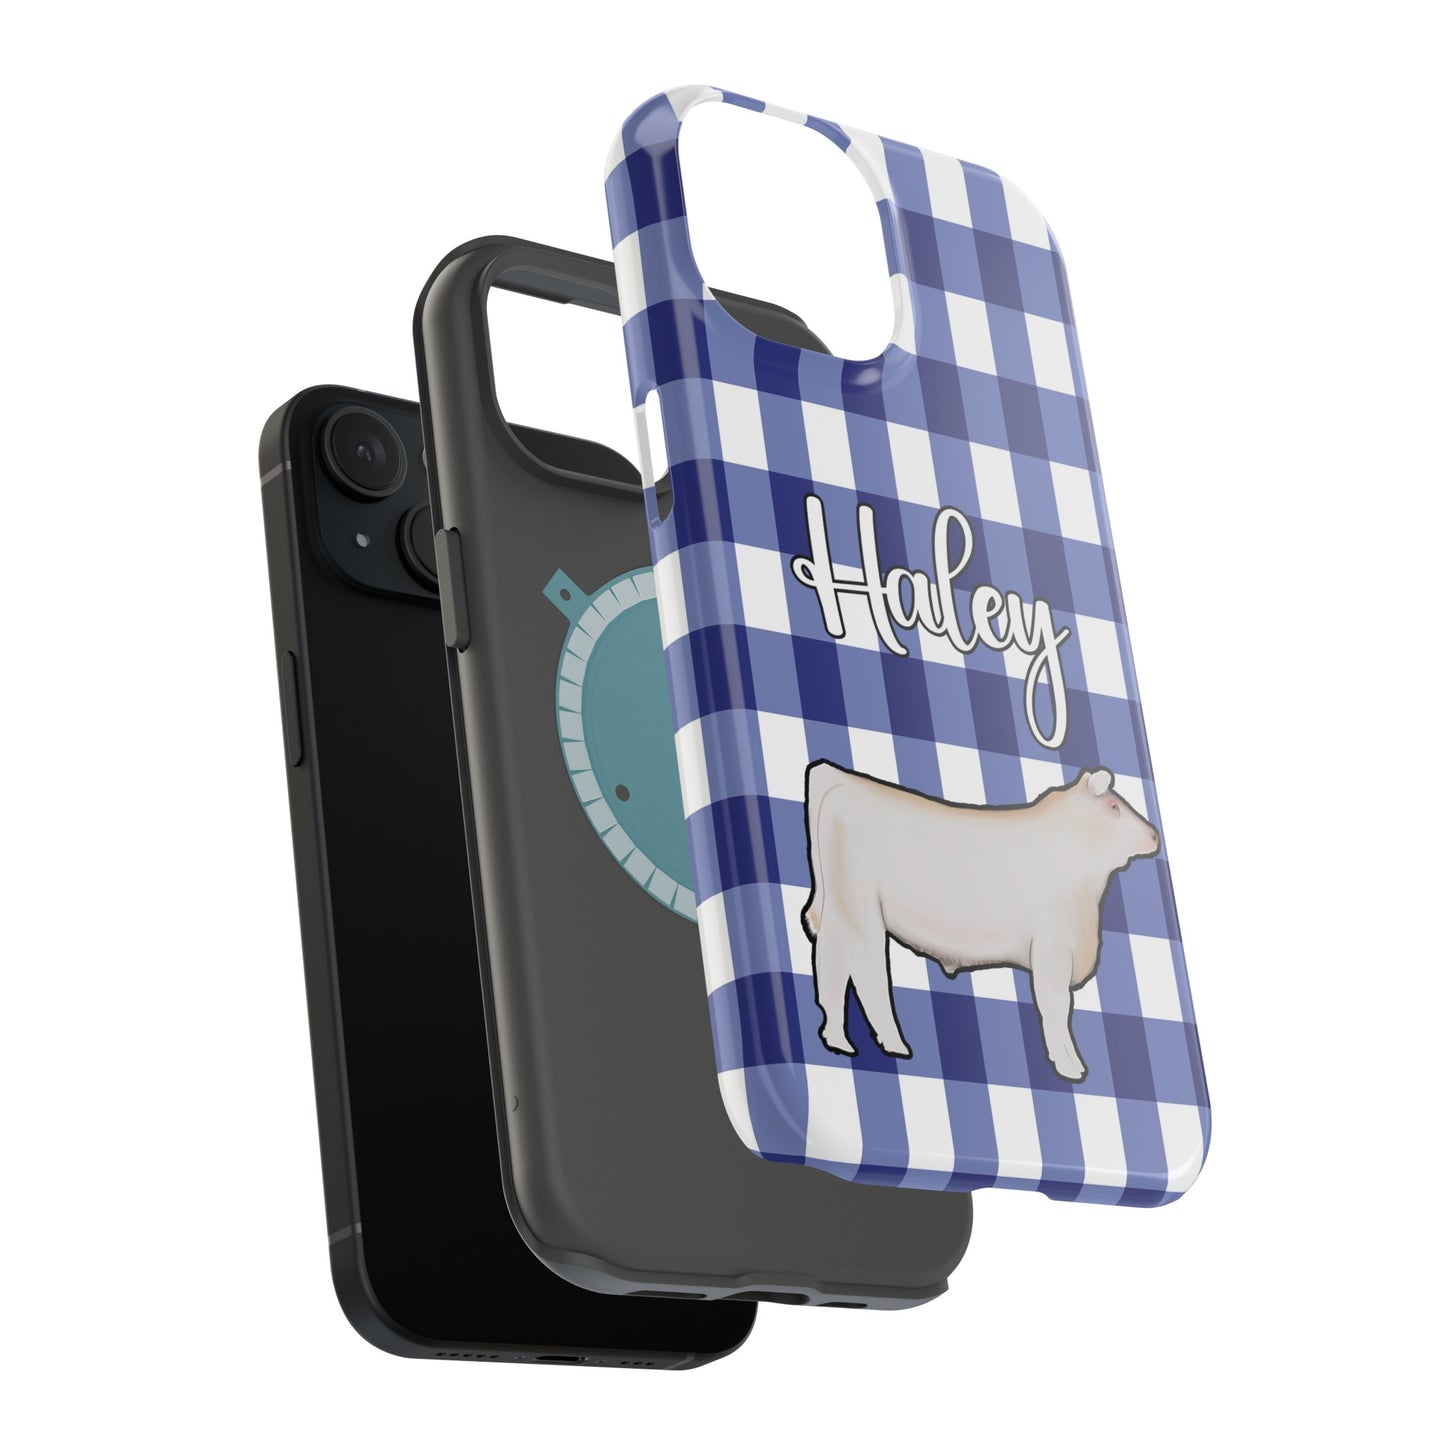 MagSafe iPhone Cases - Livestock Show Charolaise Steer - iPhone Cow Phone Cases